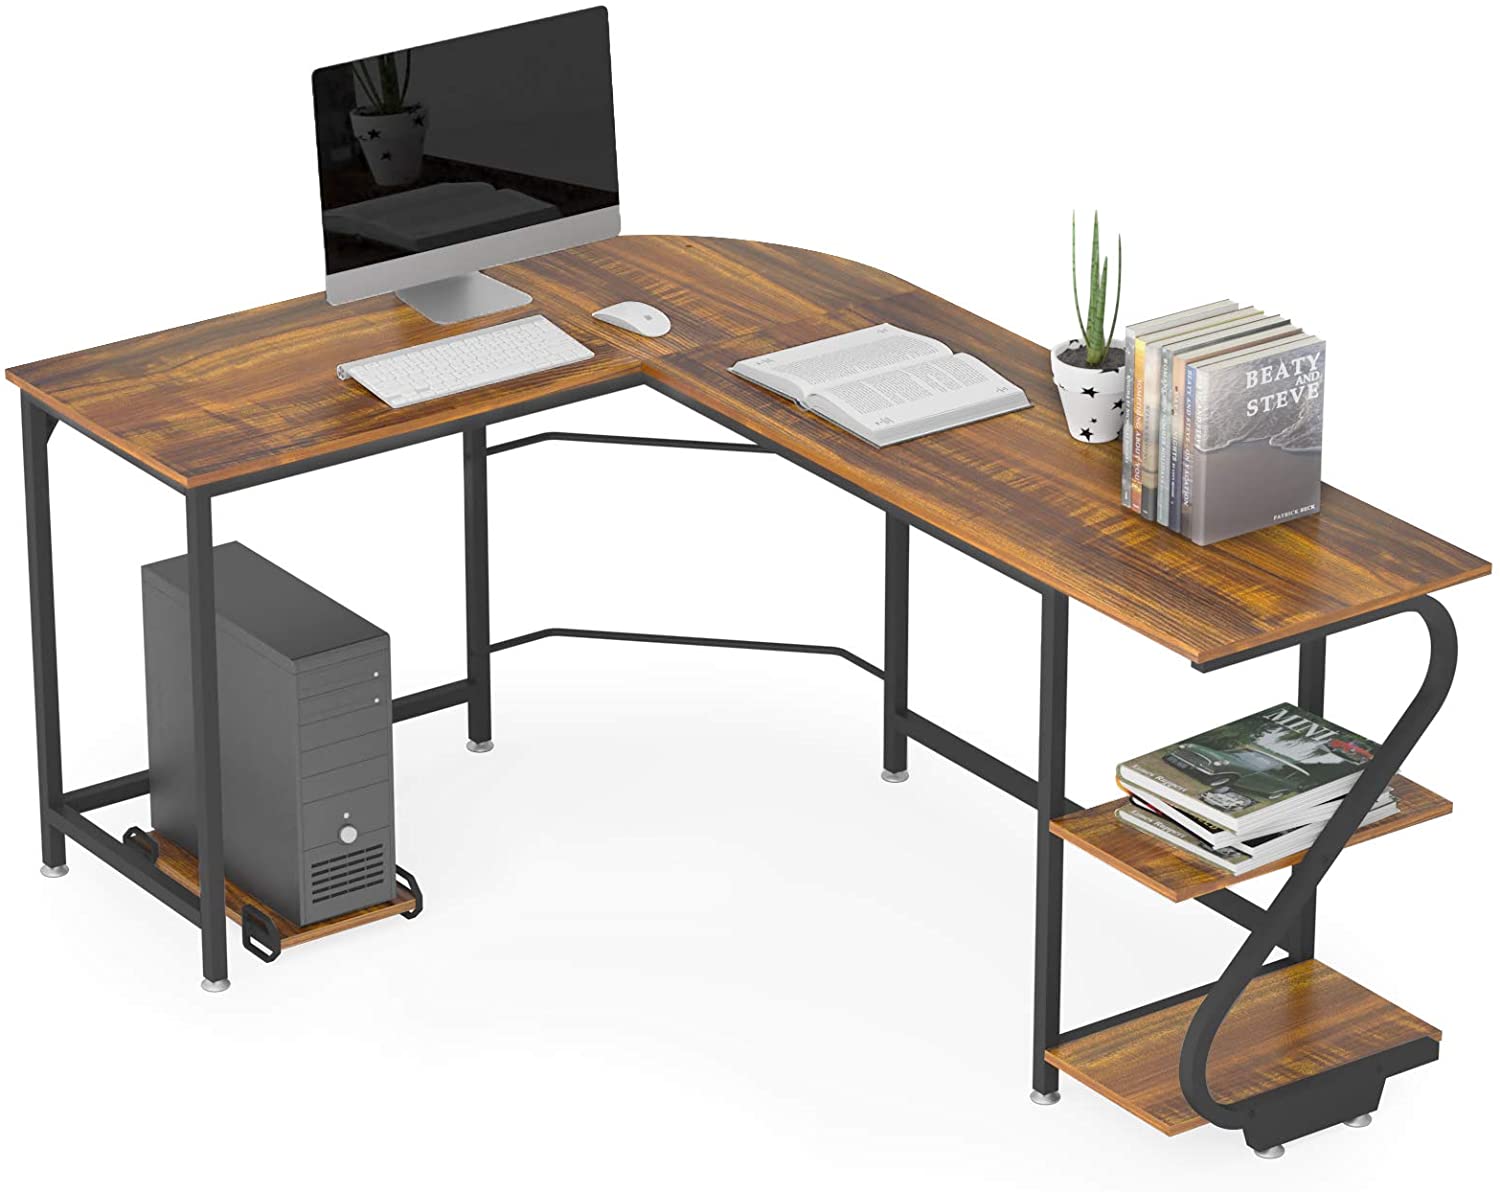 Weehom Reversible L Shaped Desk With Shelves